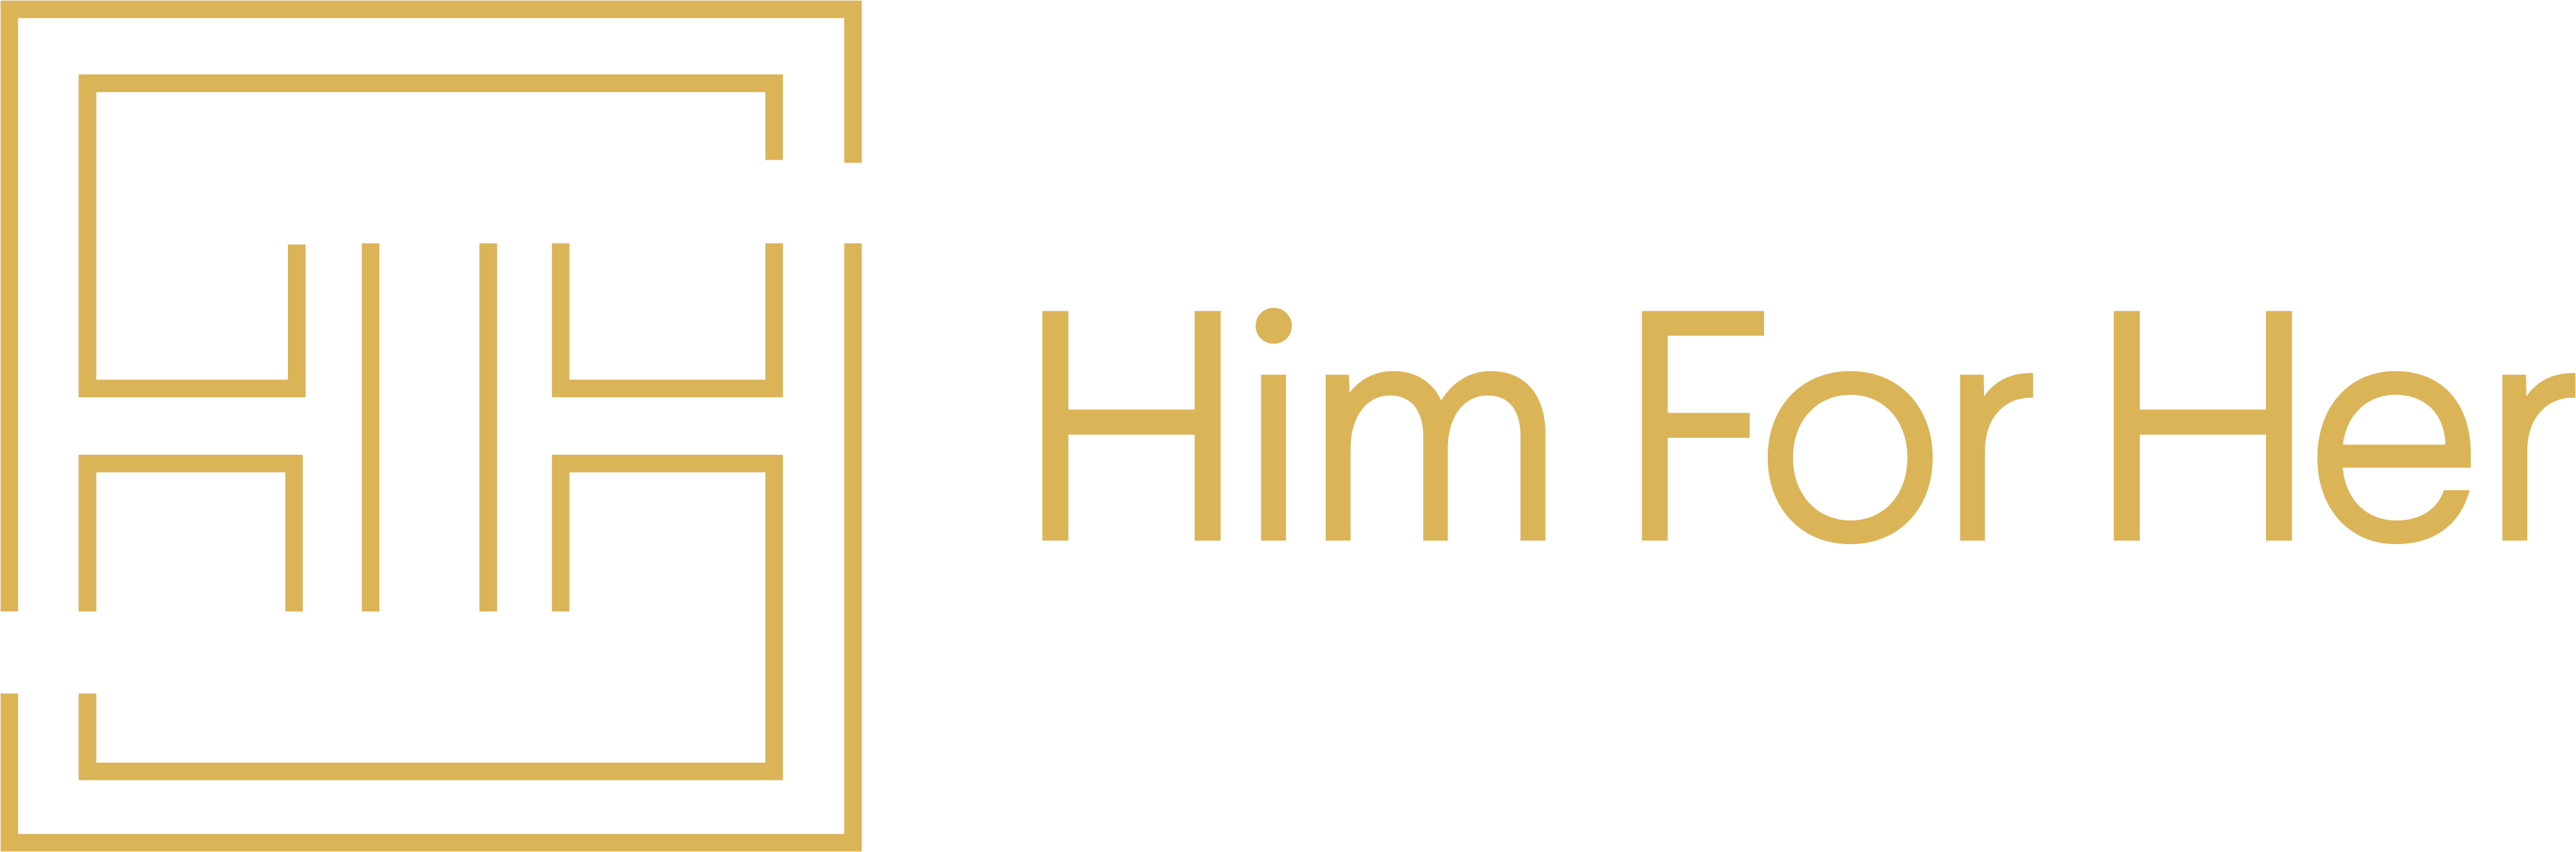 Him For Her logo